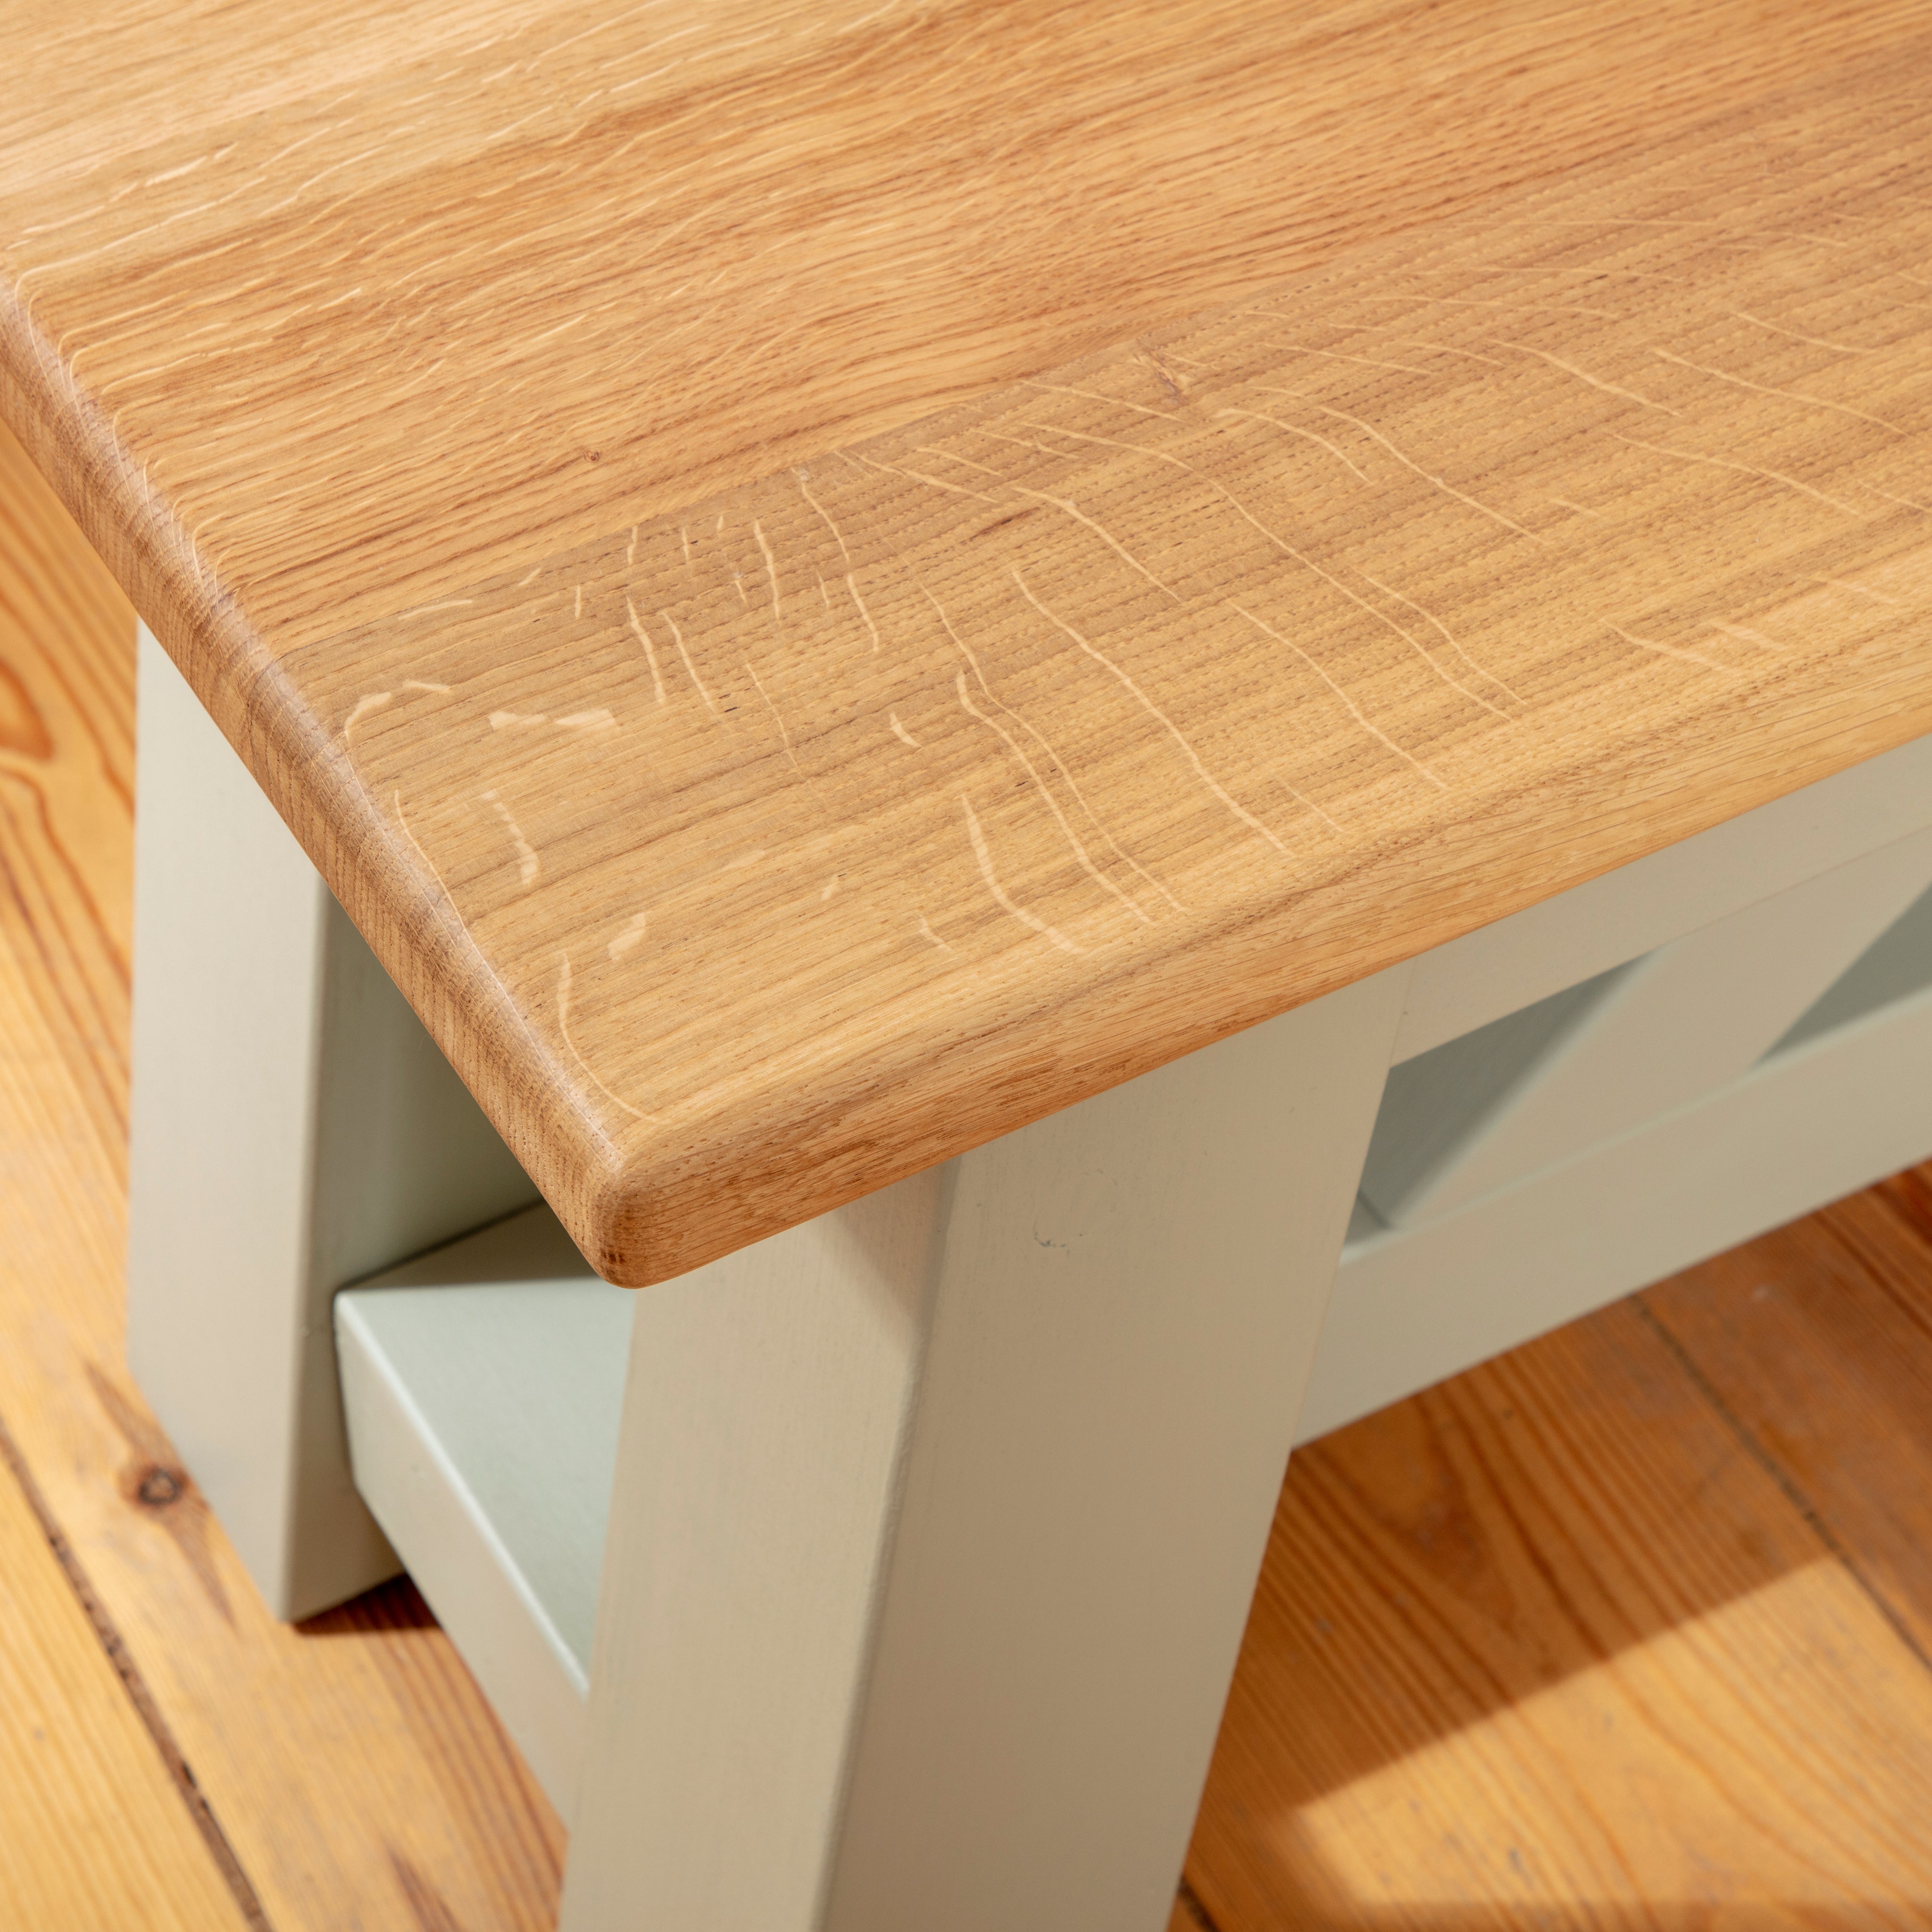 Langley Oak Dining Table And Benches